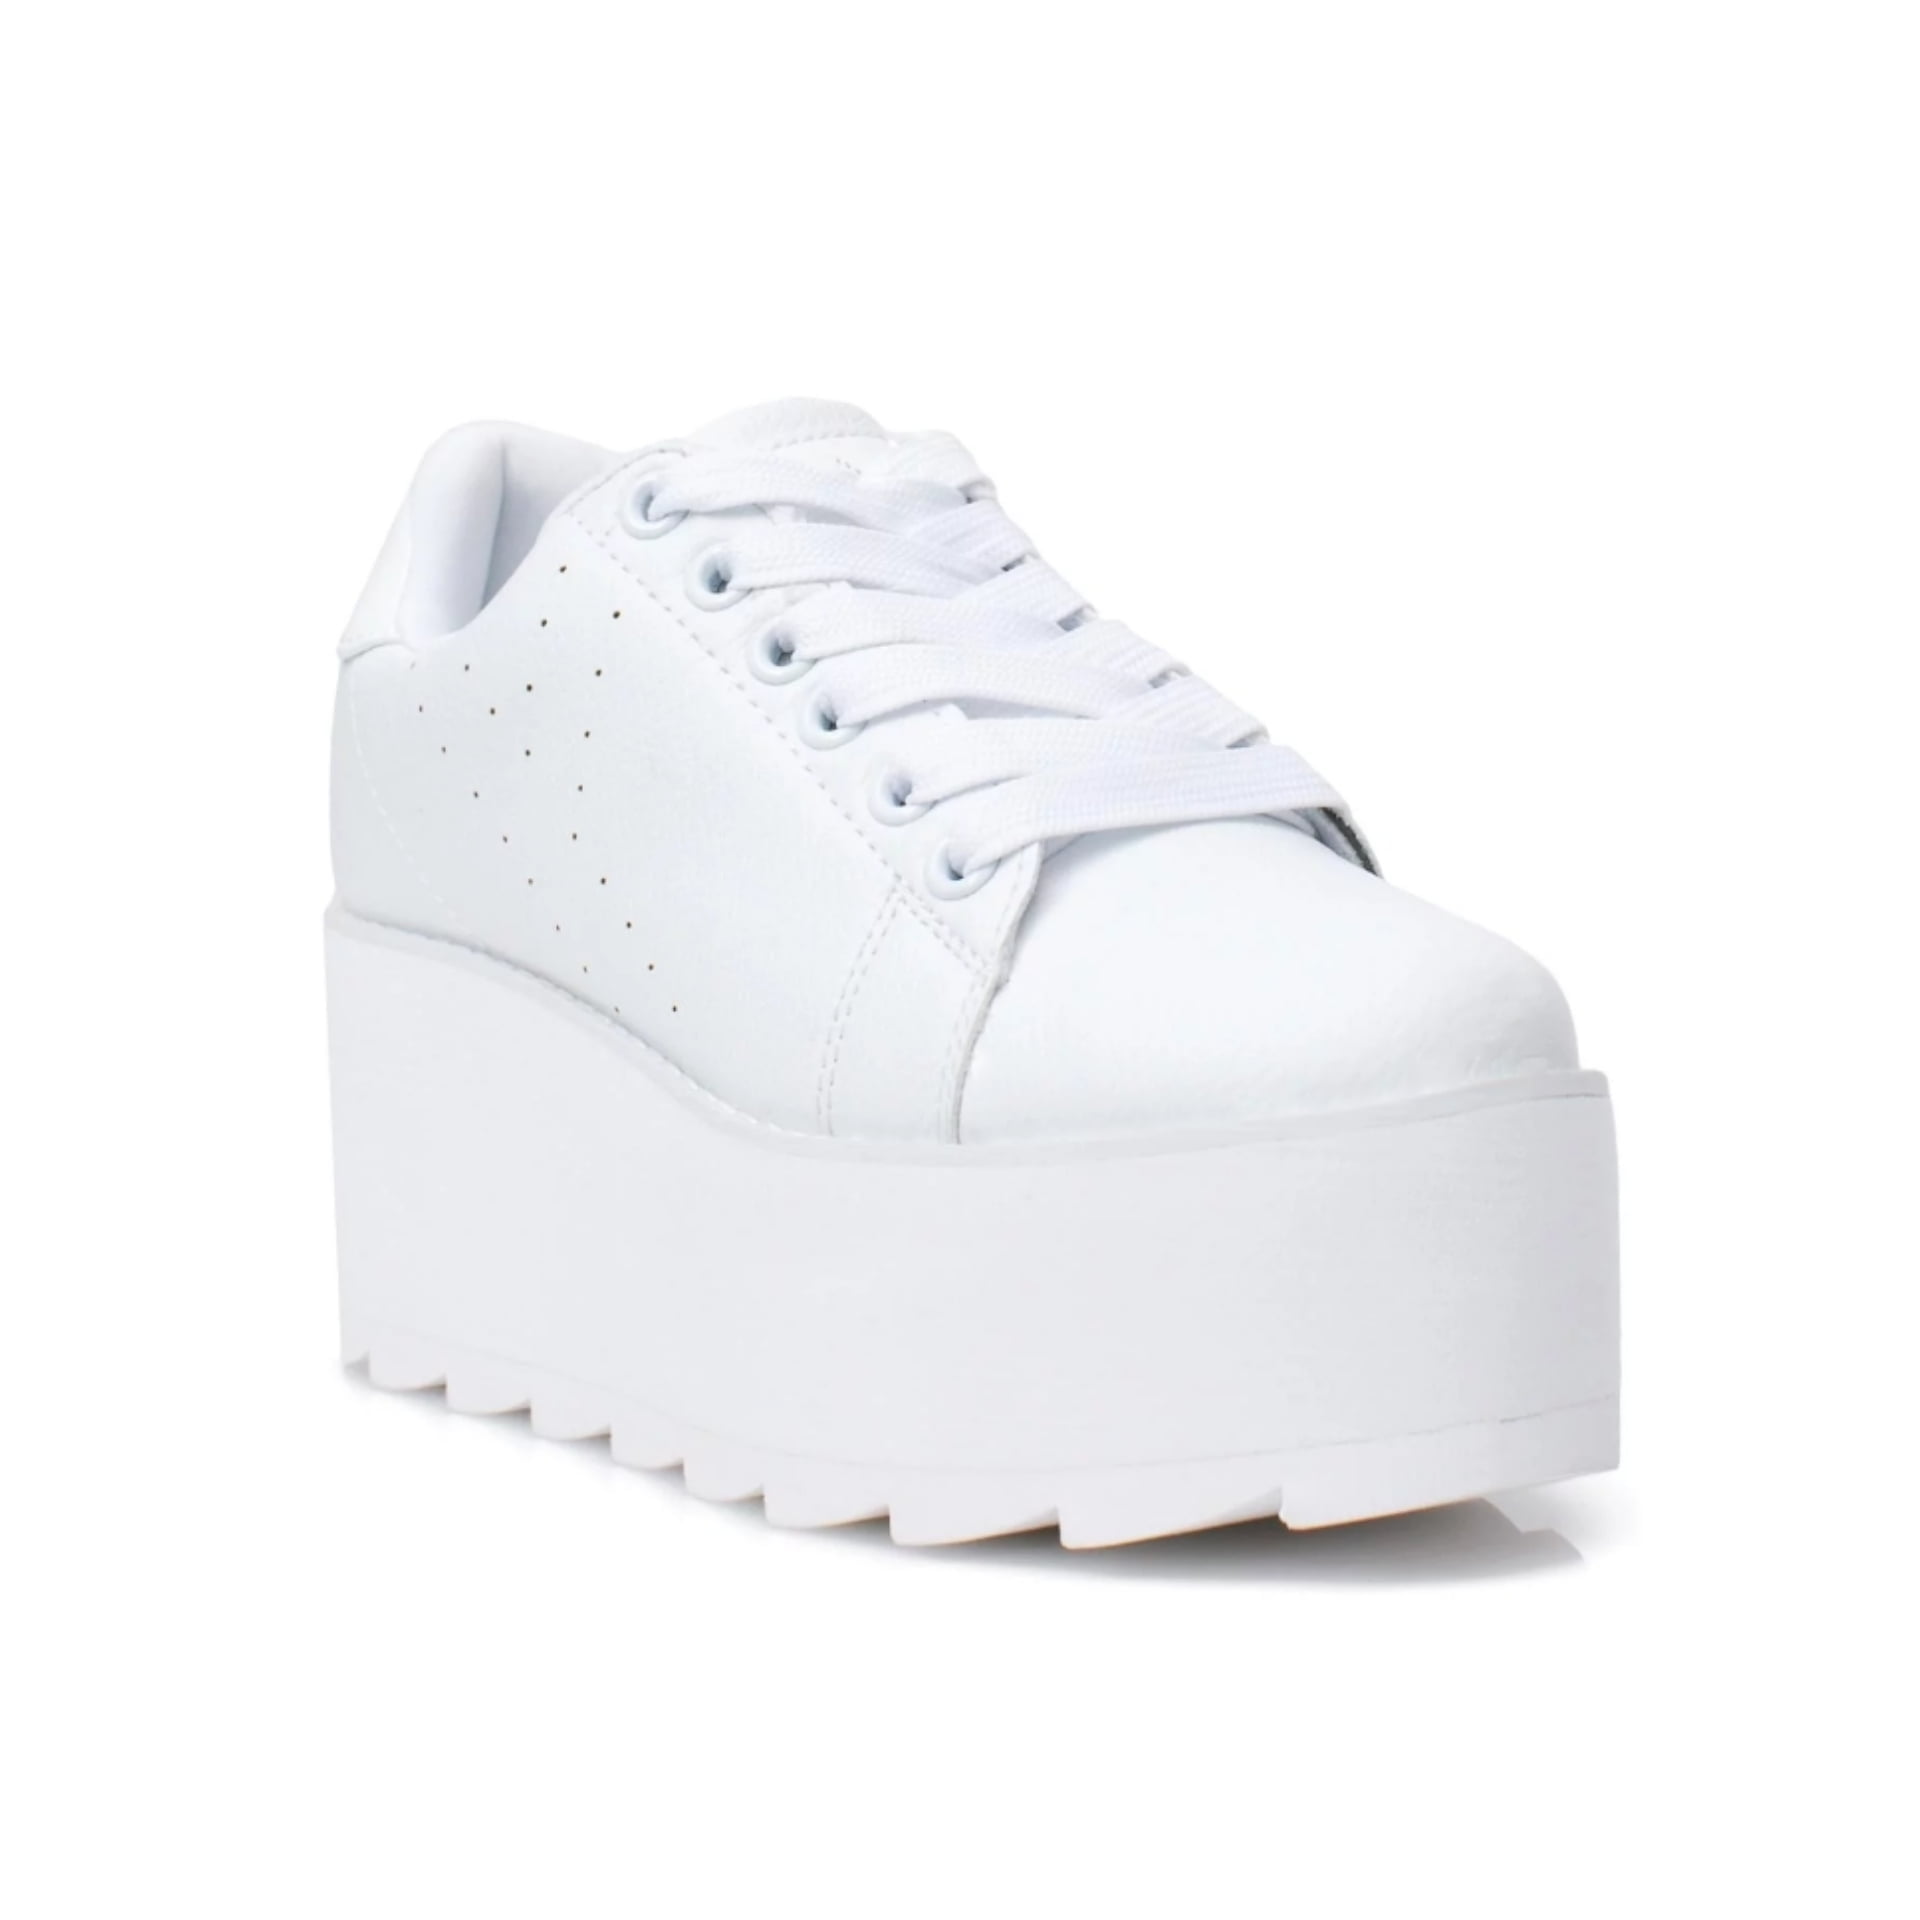 Cheap platform sneakers - Buy and Slay